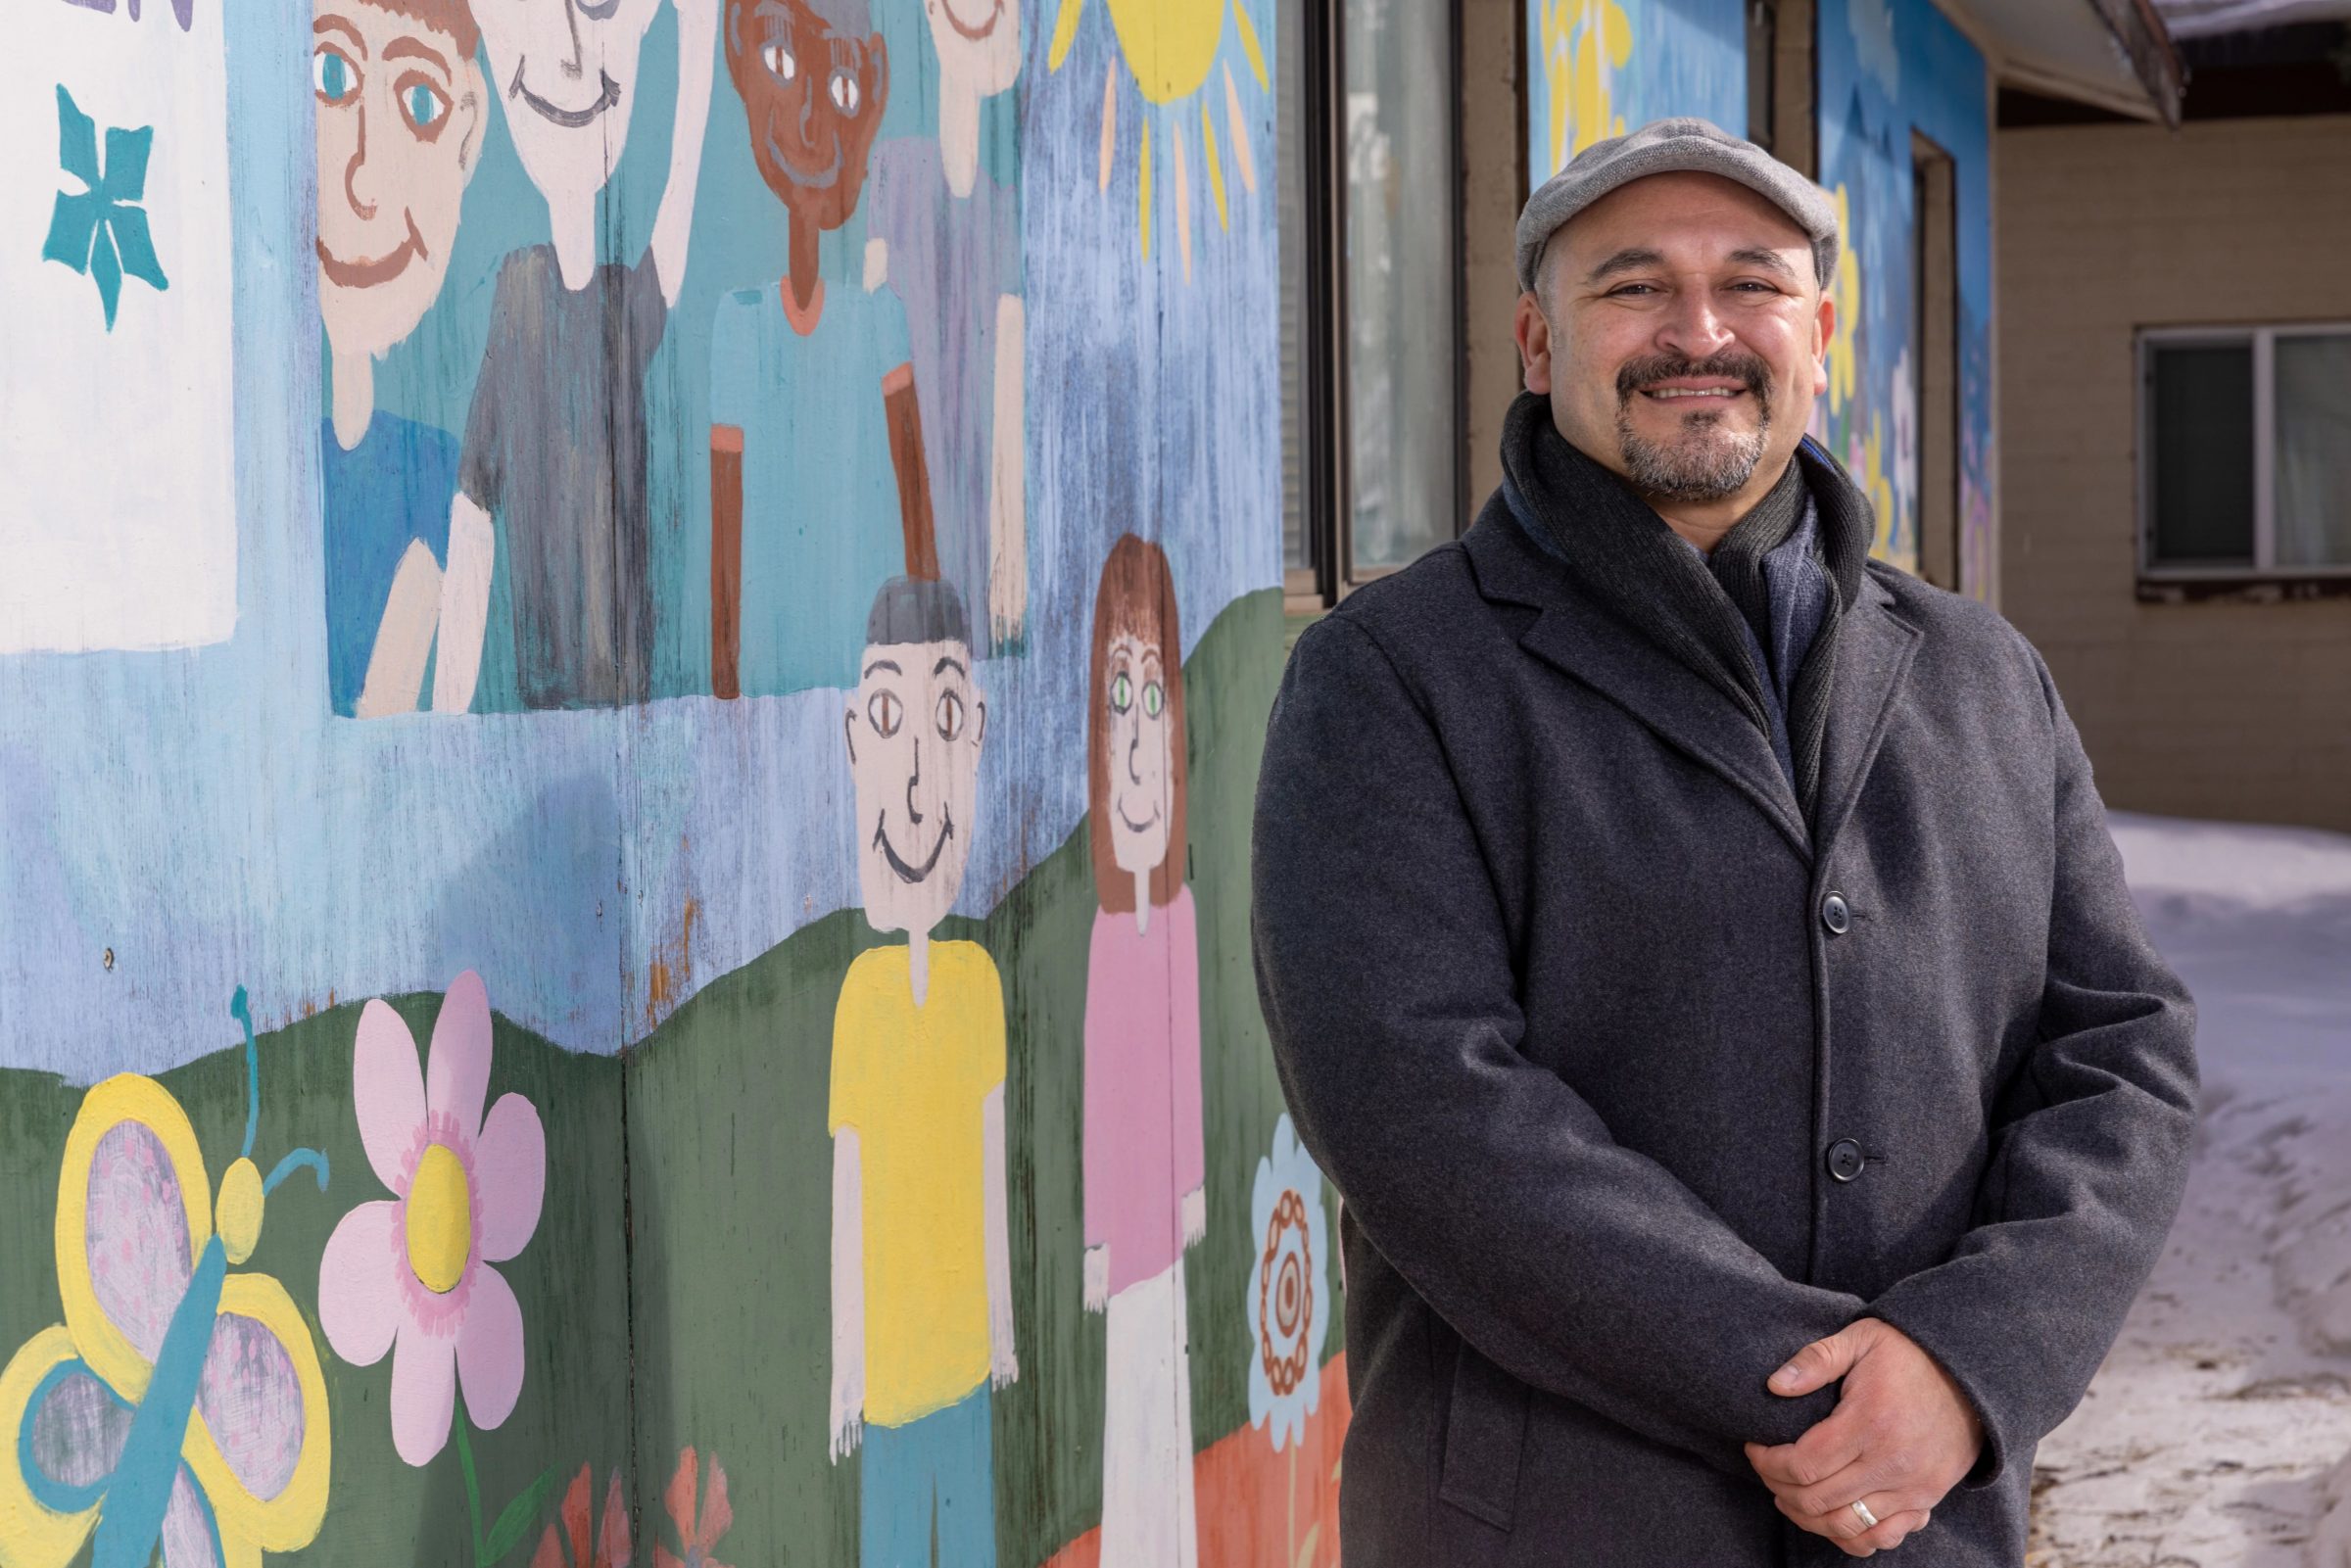 NAU alumnus and Coconino County Board of Supervisors vice chair Jeronimo Vasquez stands beside mural of smiling children, flowers, butterflies, and the sun. Vasquez is looking at the camera and smiling.